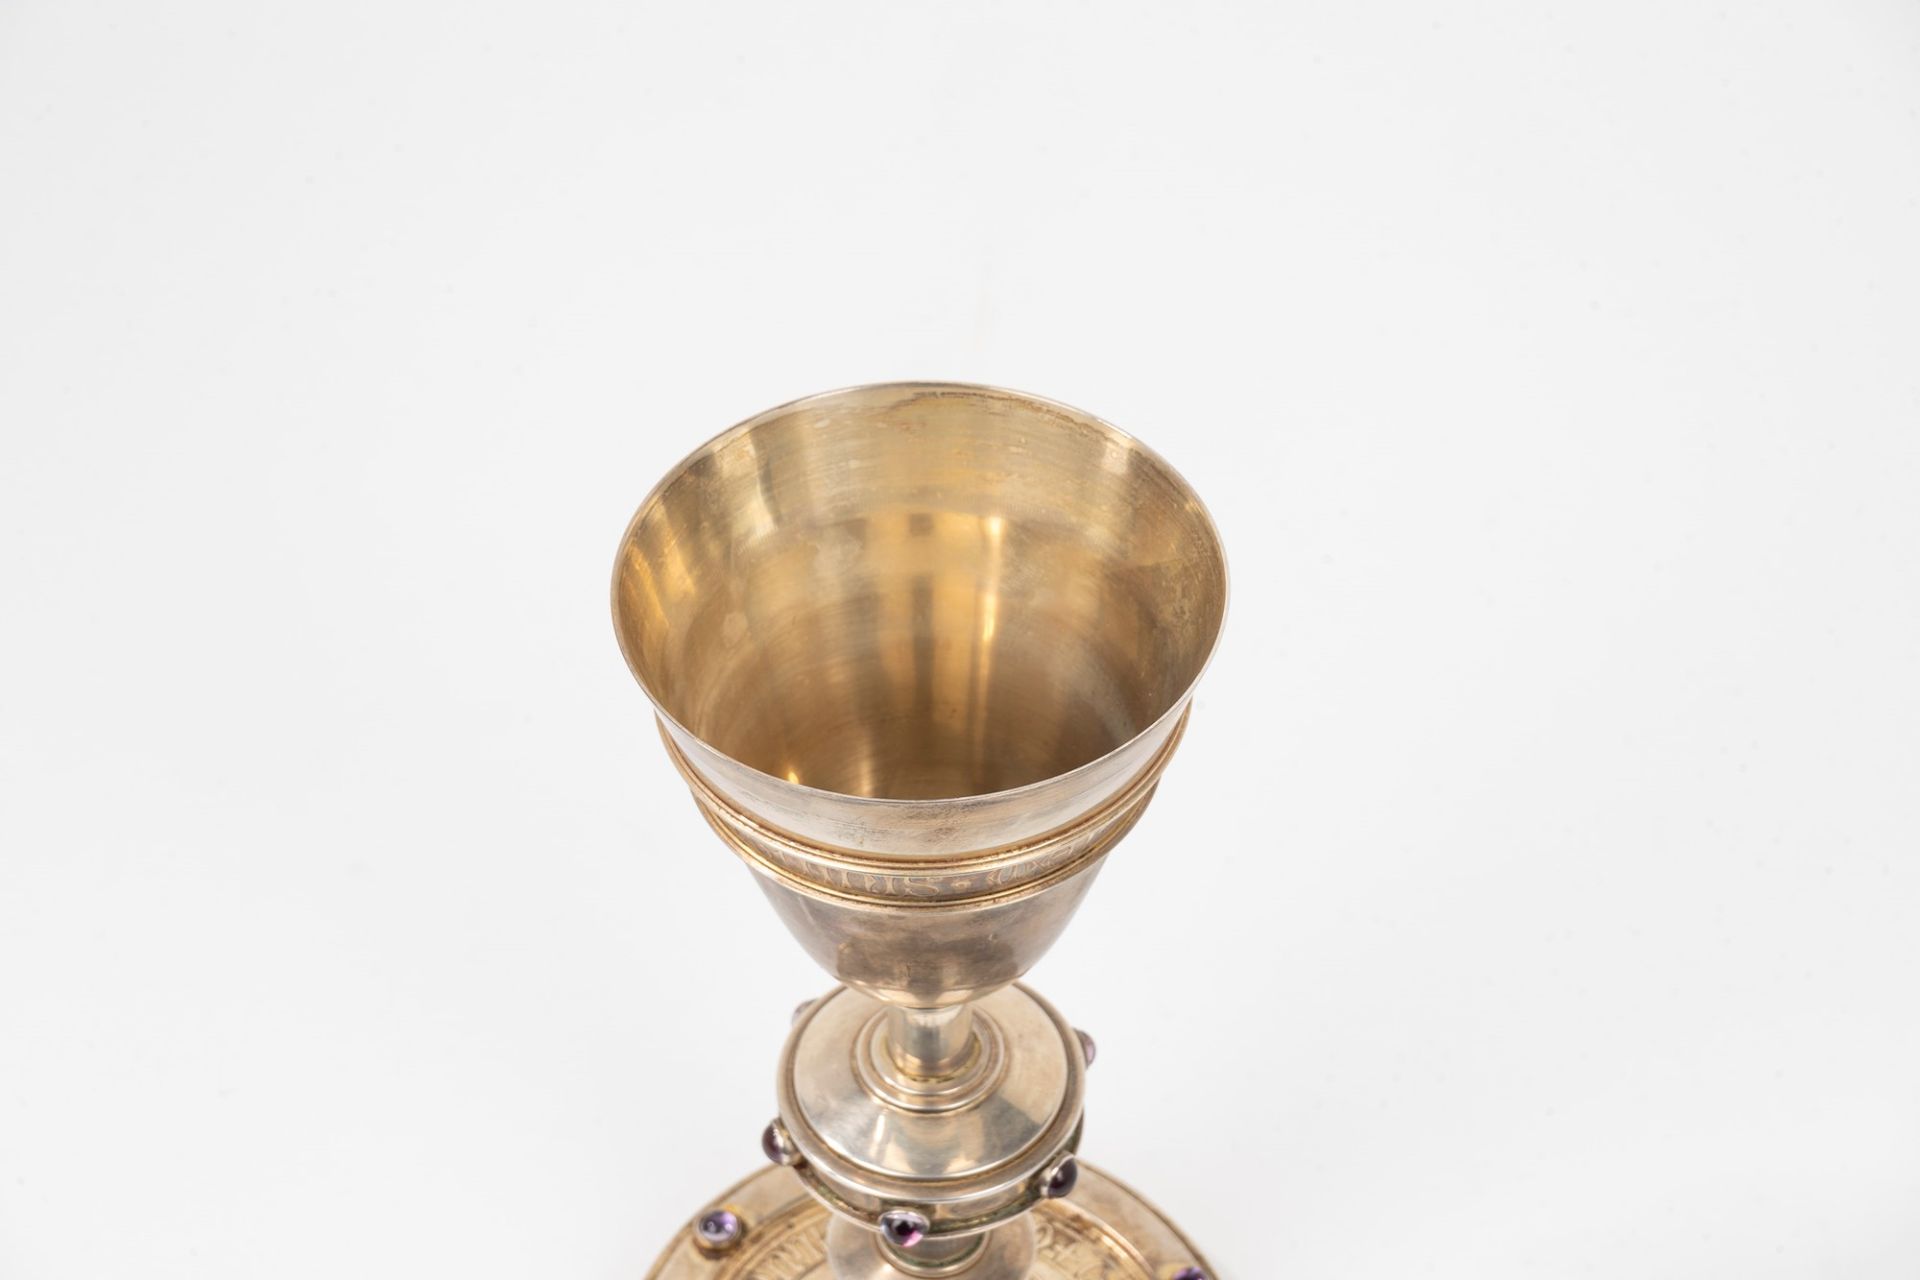 Large silver chalice with saucer, France, late 19th century - Image 4 of 7